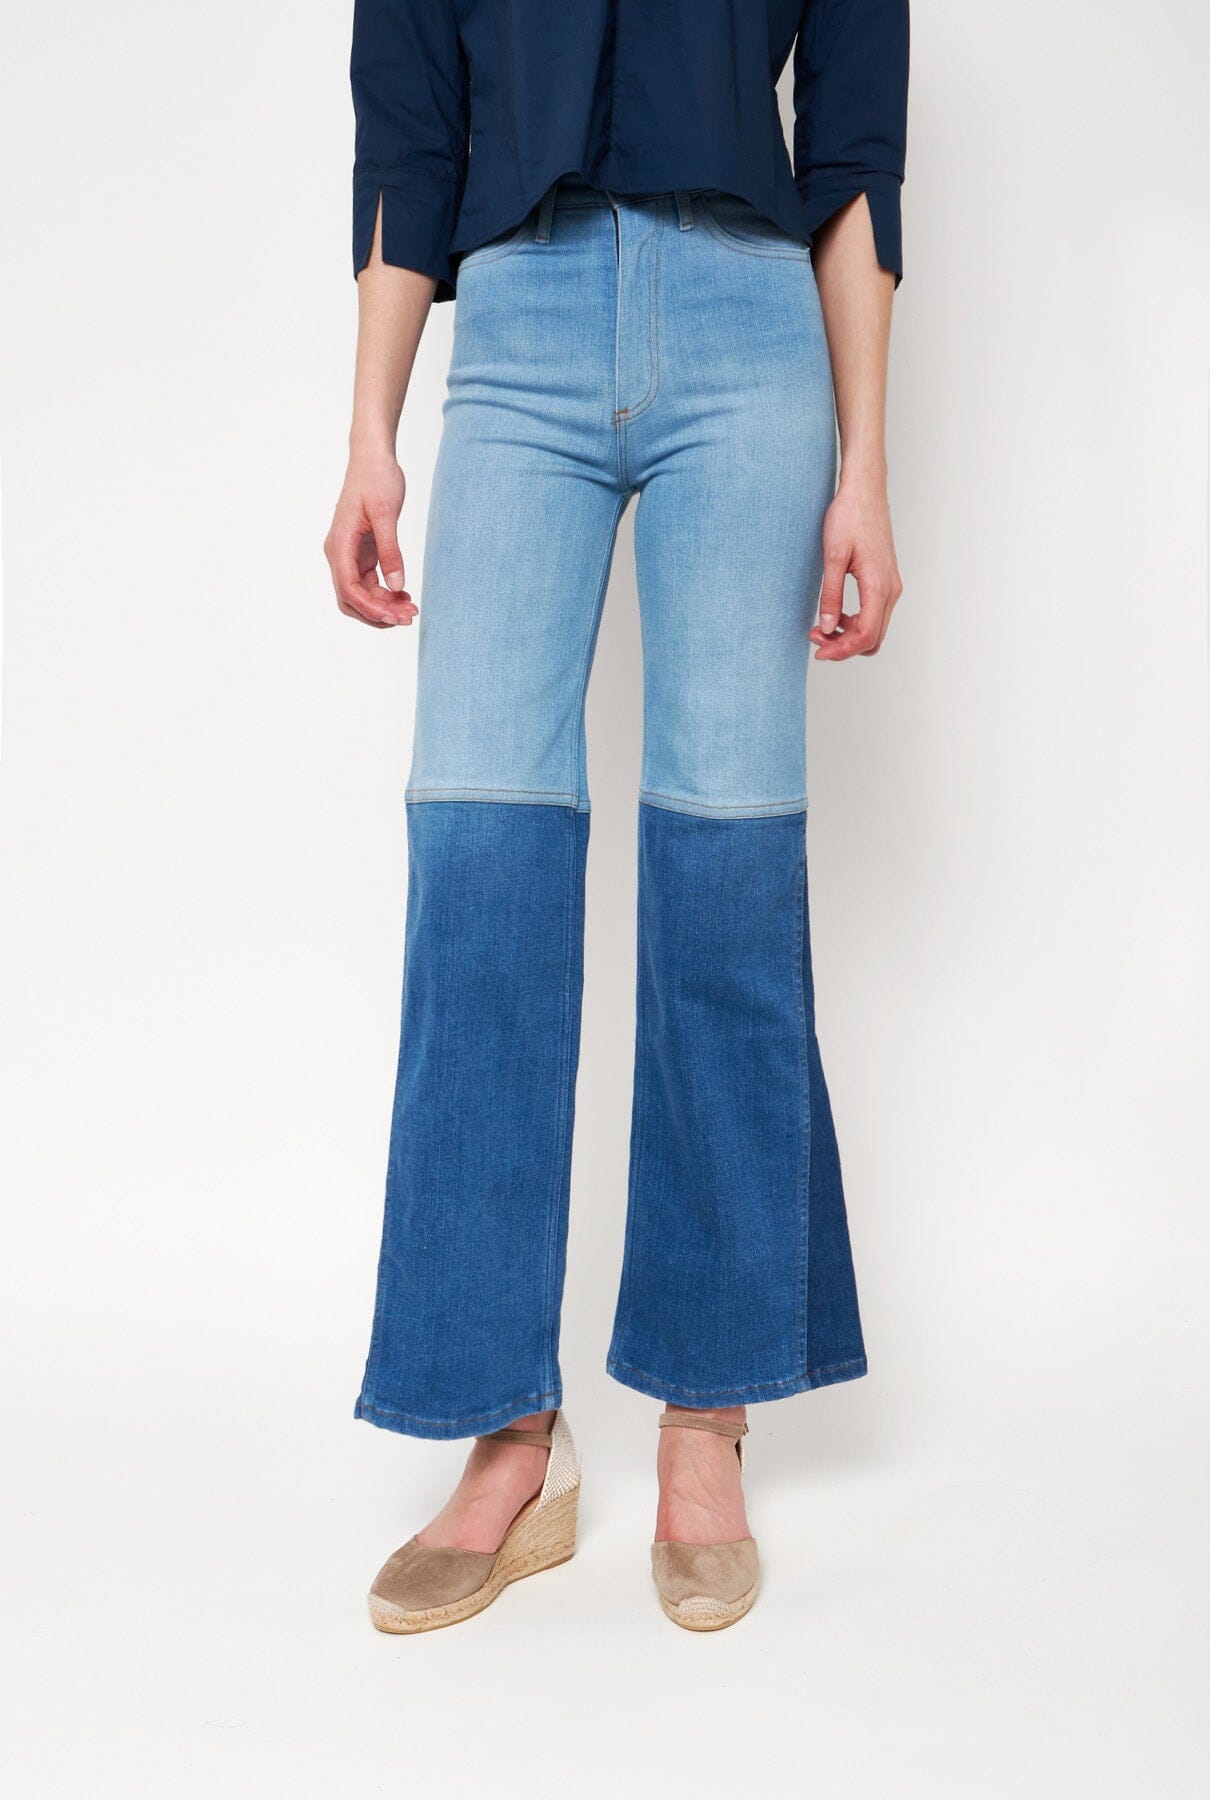 Alba stretch blue Trousers Julise Magon 